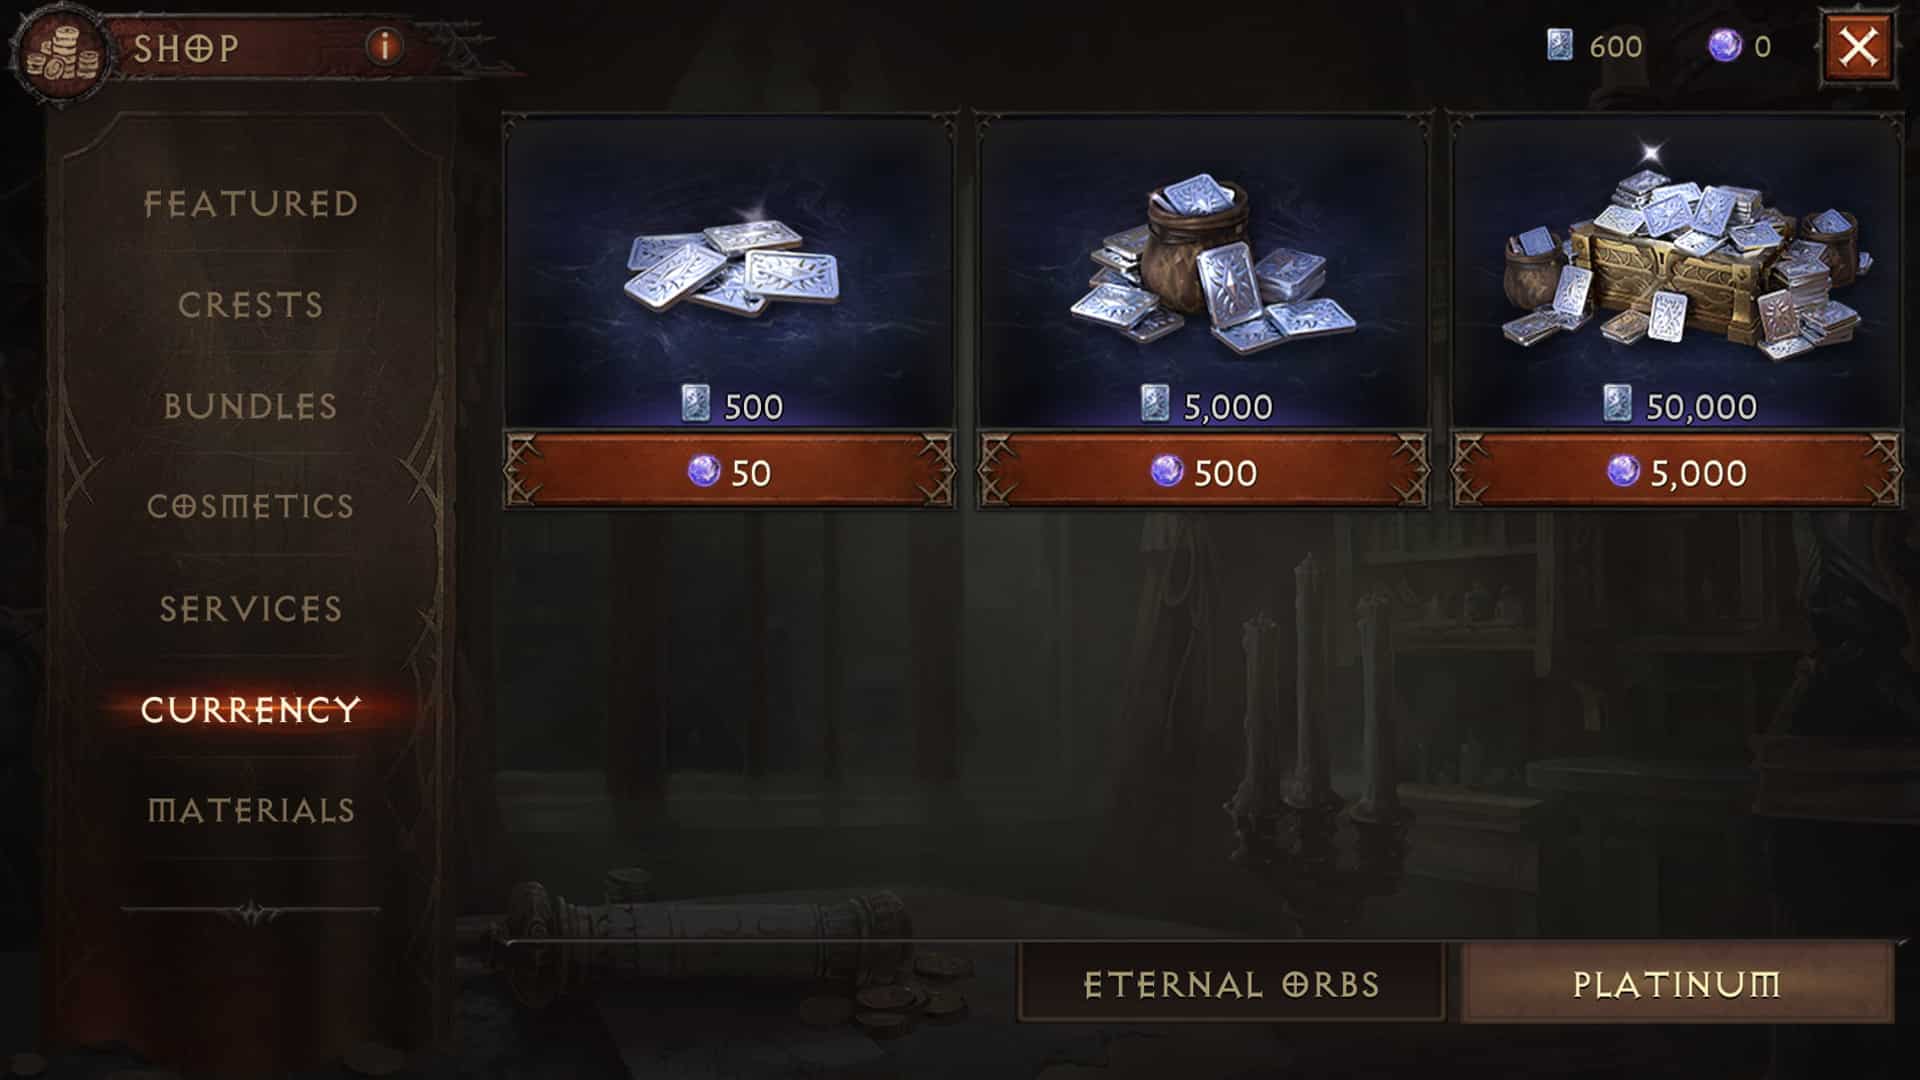 Platinum prices for Eternal Orbs